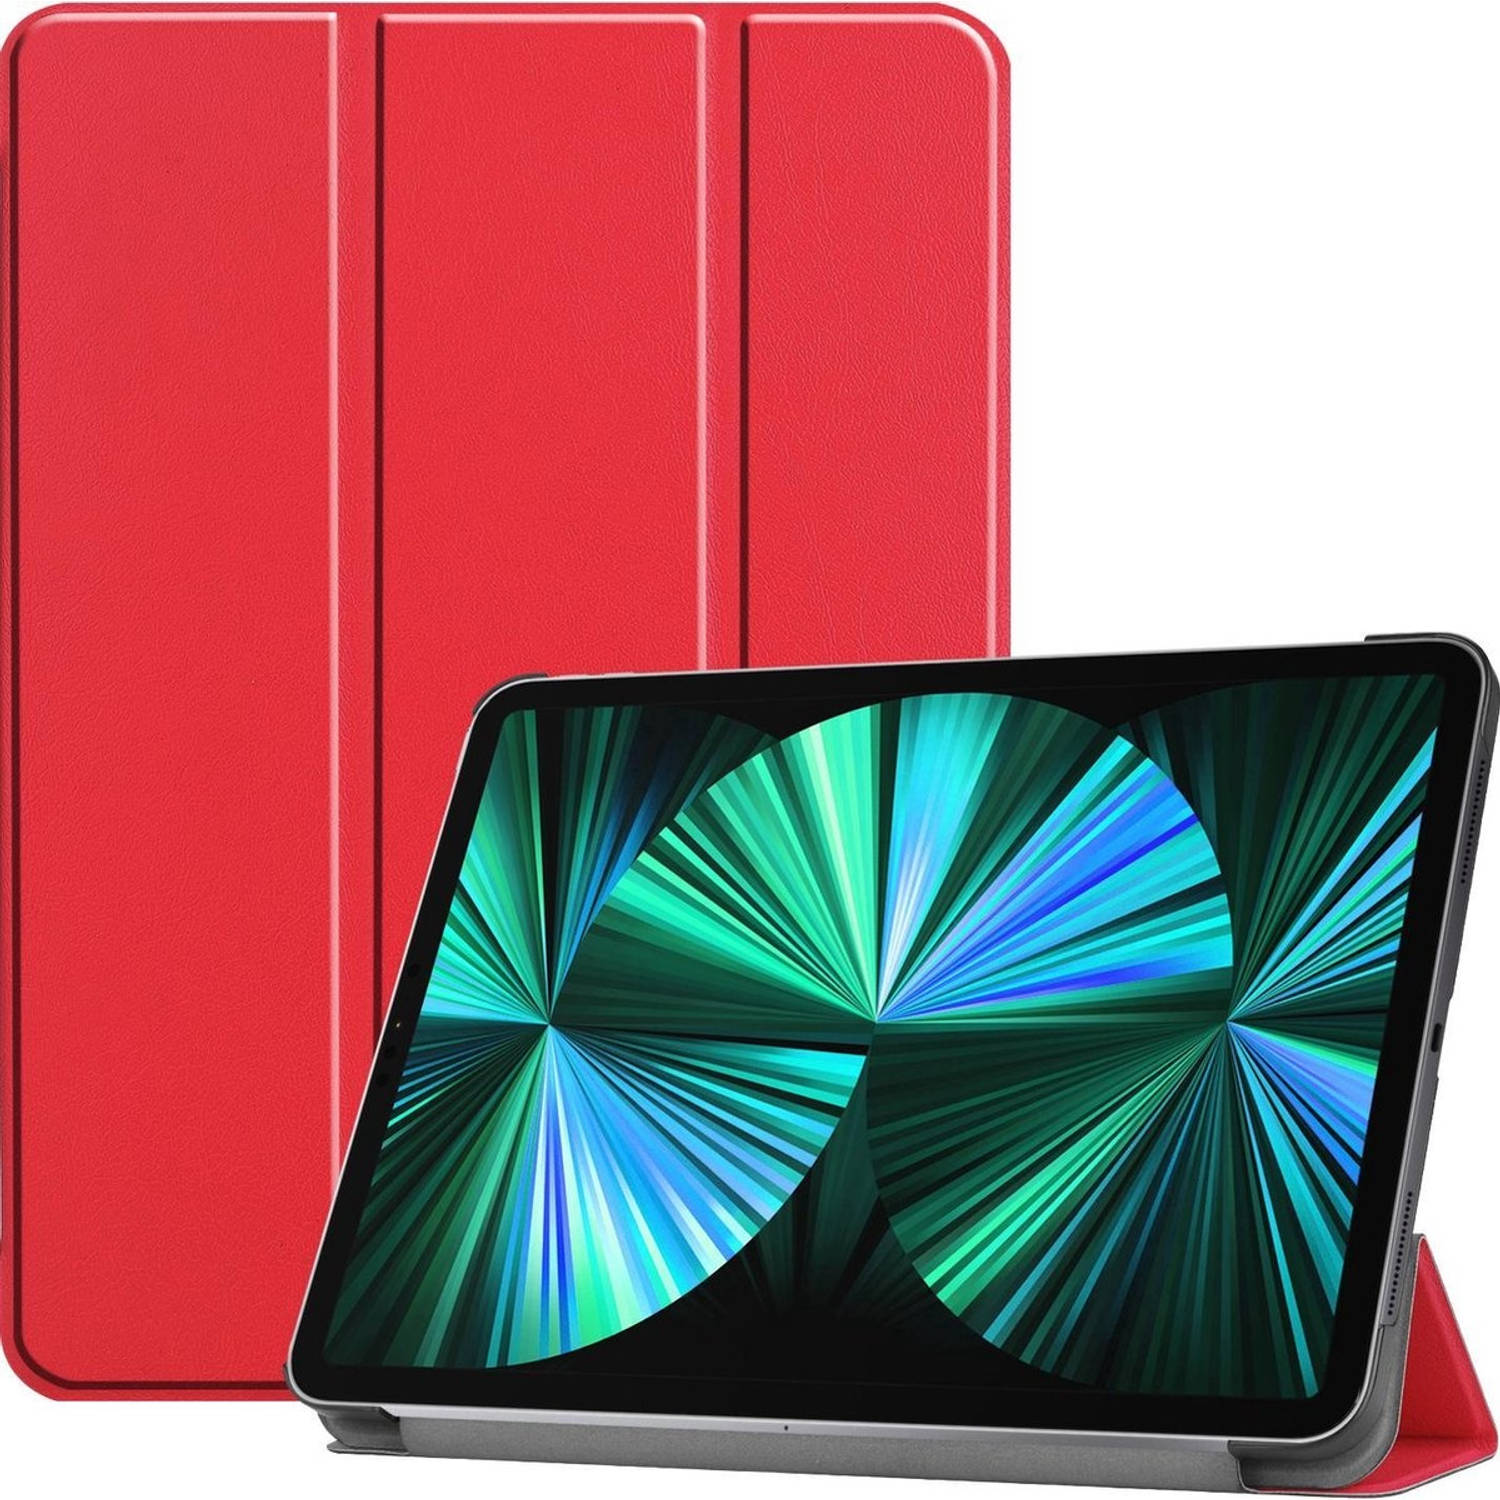 Basey Ipad Pro 2021 12,9 Inch Hoes Case Hoesje Rood Hardcover Book Case Cover